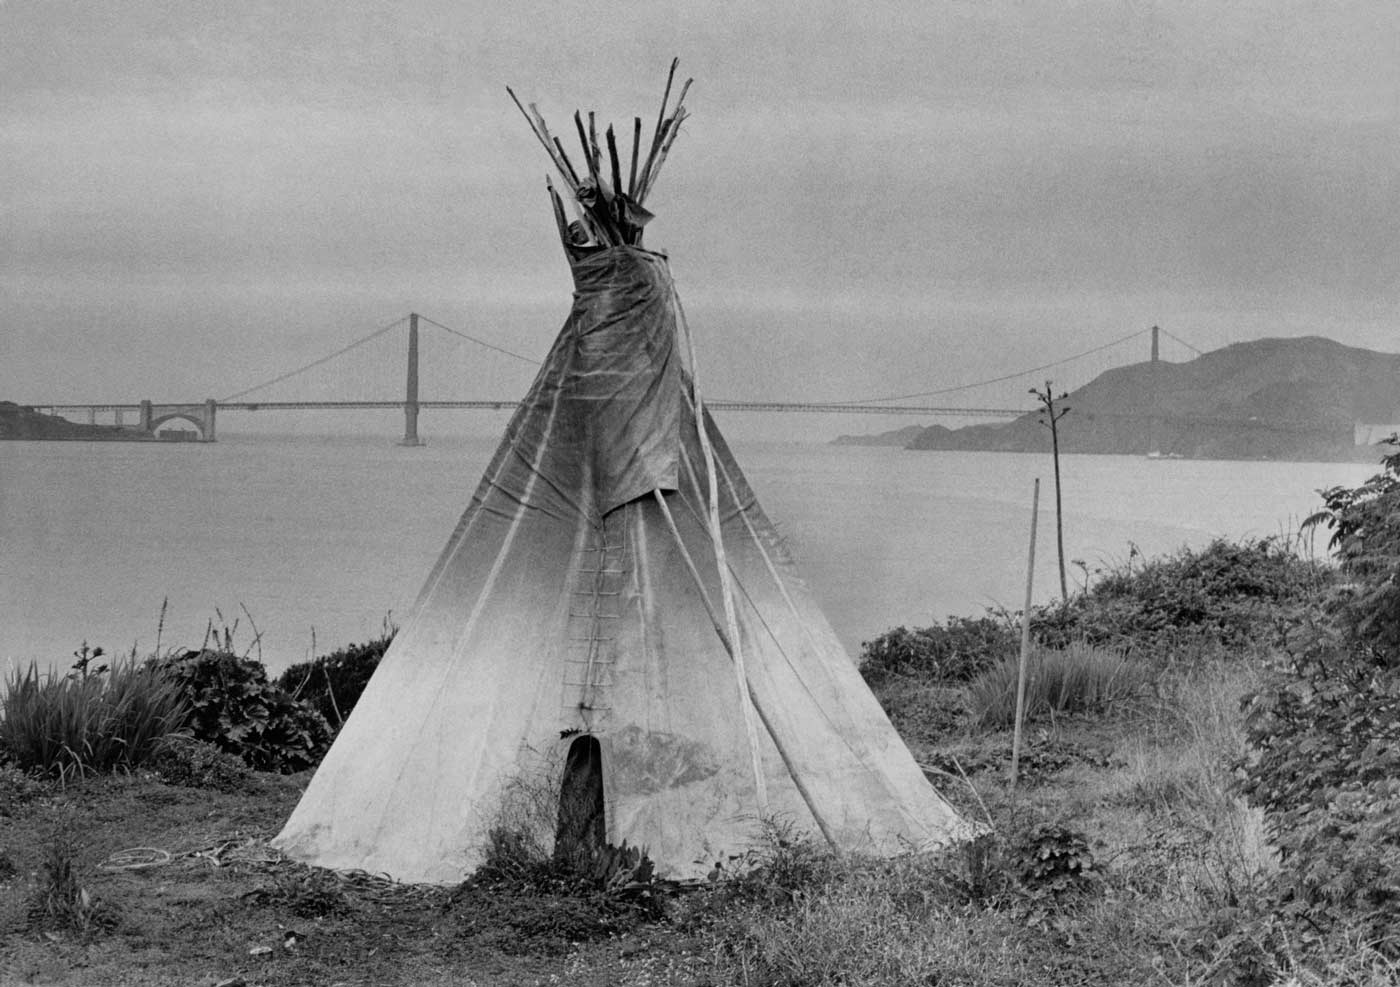 Black and white photograph of a tipi set up in the grass on Alcatraz, Golden Gate bridge and San Francisco Bay are visible in the background.